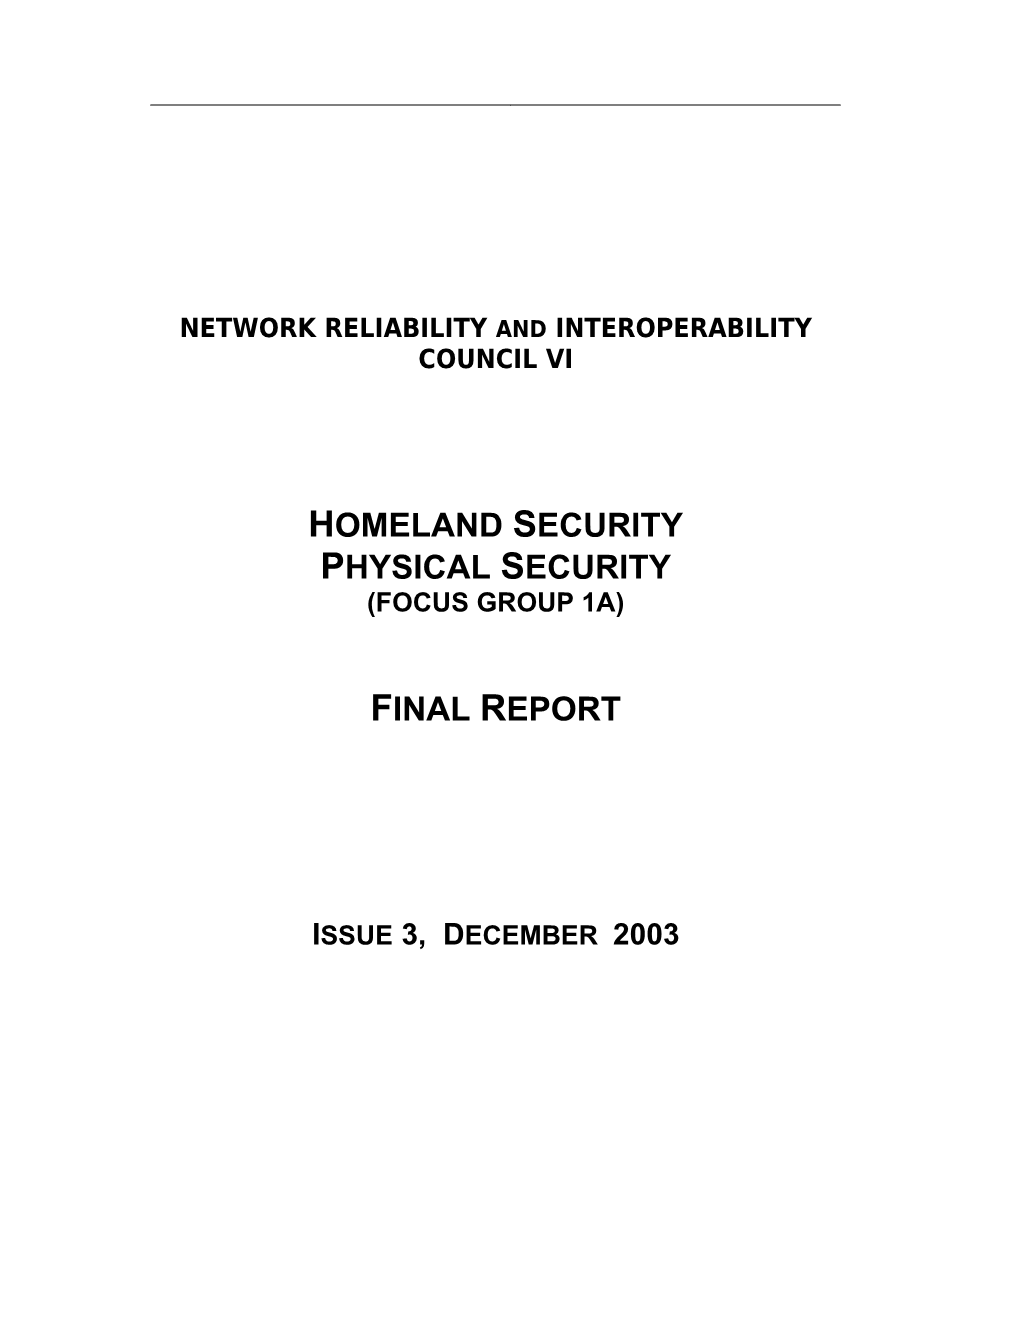 Network Reliability and Interoperability Council VI Homeland Security